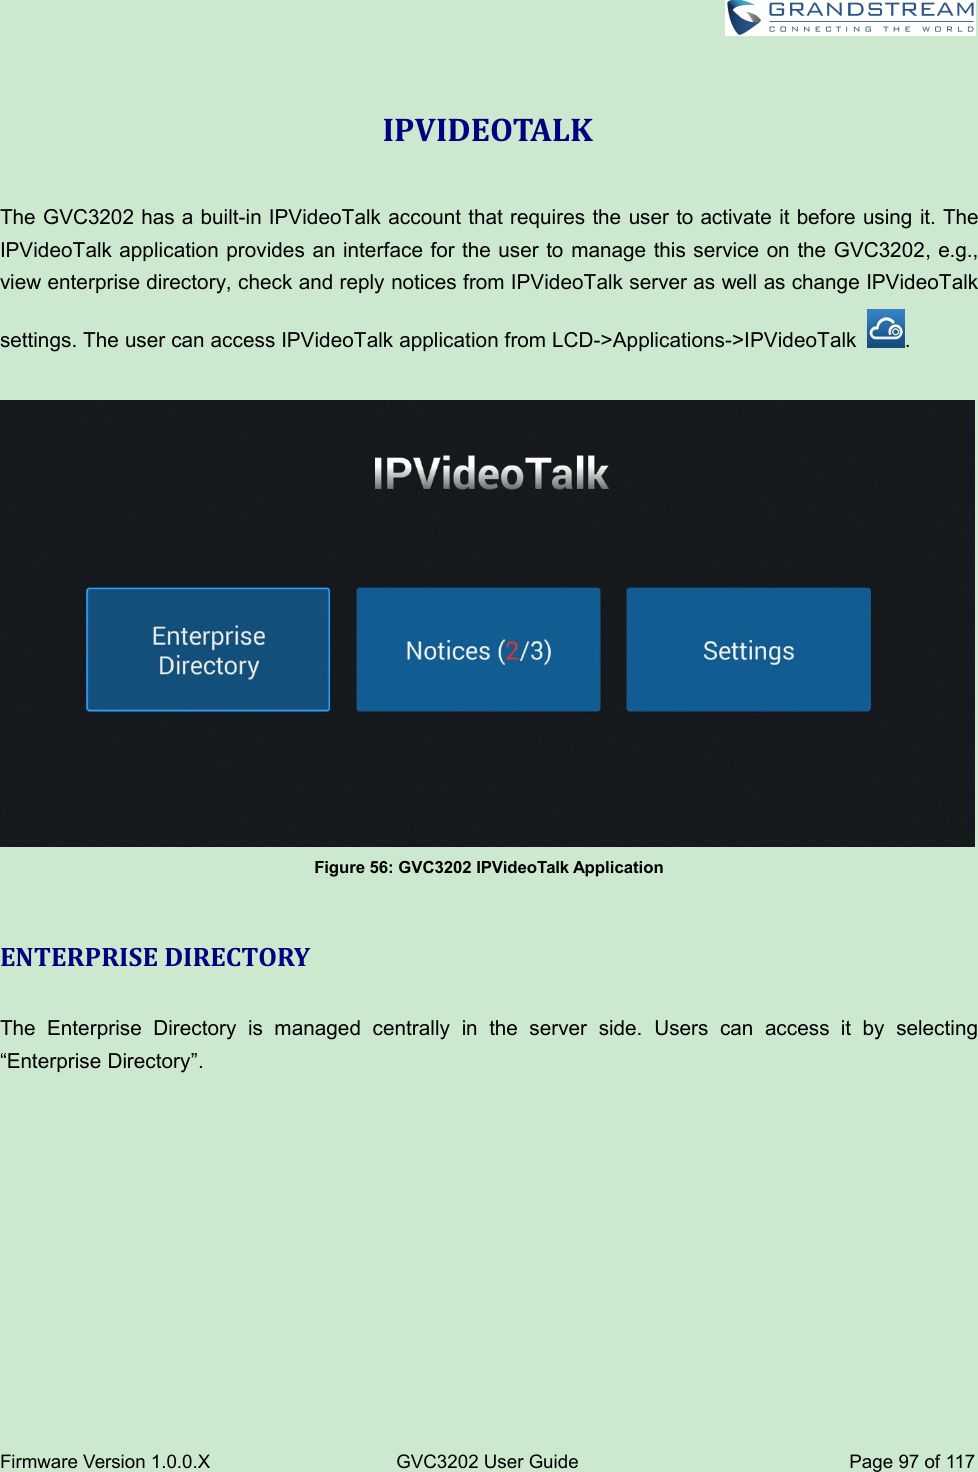 Firmware Version 1.0.0.XGVC3202 User GuidePage 97 of 117IPVIDEOTALKThe GVC3202 has a built-in IPVideoTalk account that requires the user to activate it before using it. TheIPVideoTalk application provides an interface for the user to manage this service on the GVC3202, e.g.,view enterprise directory, check and reply notices from IPVideoTalk server as well as change IPVideoTalksettings. The user can access IPVideoTalk application from LCD-&gt;Applications-&gt;IPVideoTalk .Figure 56: GVC3202 IPVideoTalk ApplicationENTERPRISE DIRECTORYThe Enterprise Directory is managed centrally in the server side. Users can access it by selecting“Enterprise Directory”.